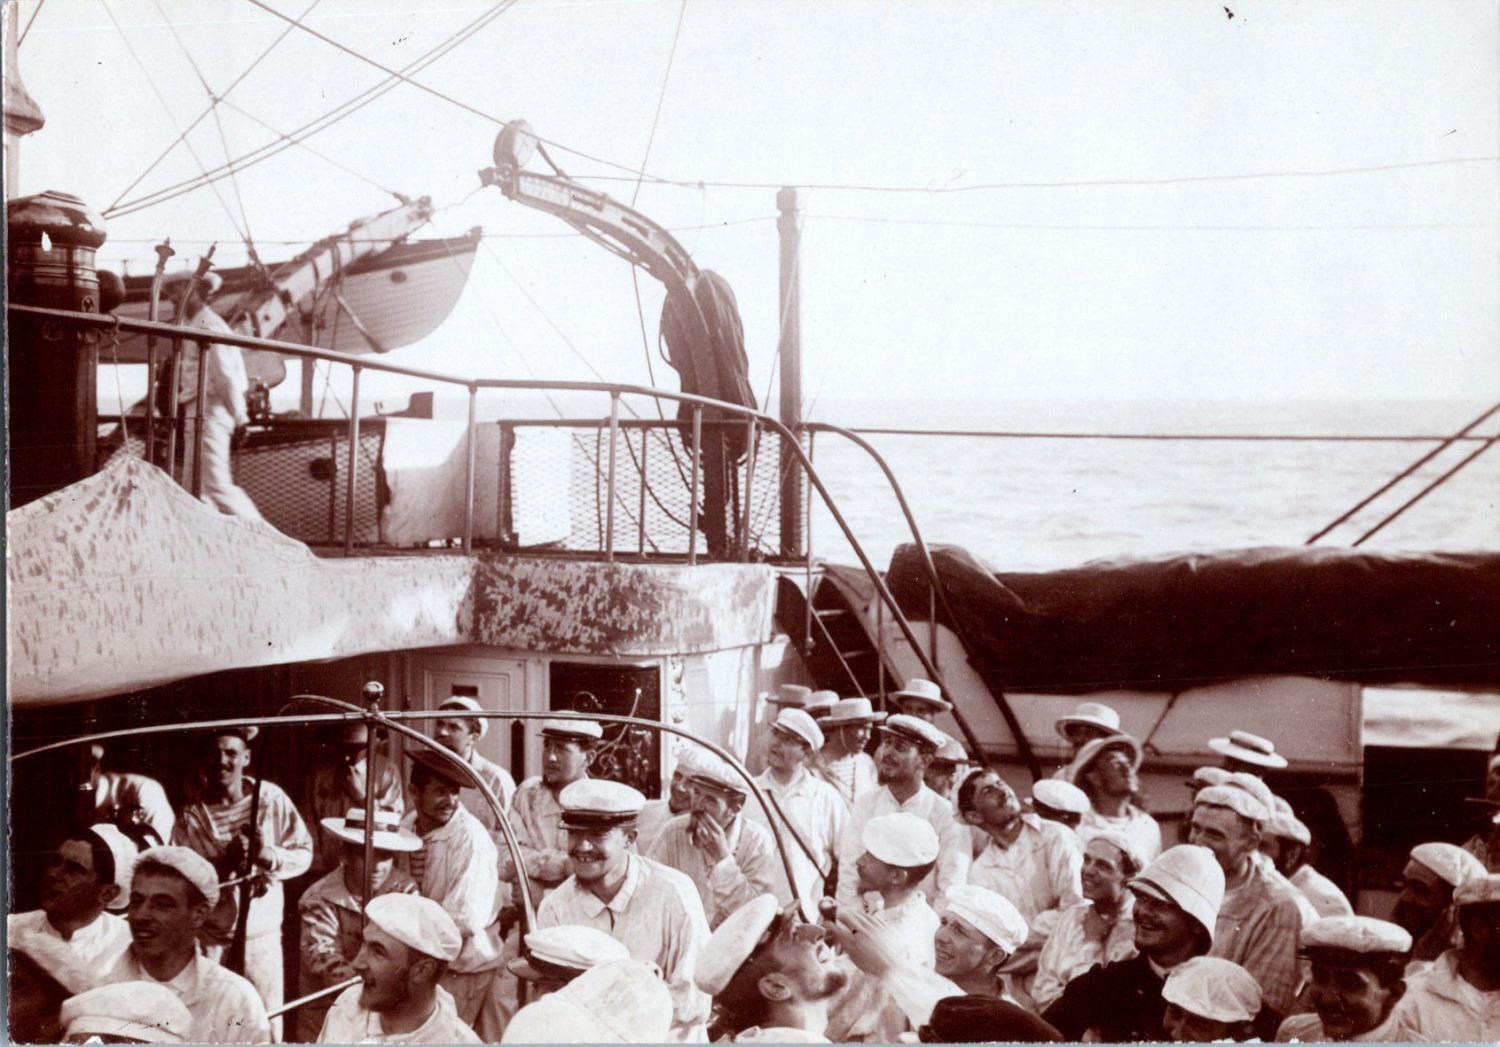 On board a boat, crossing the line midships before the ceremony, 1899 Vi